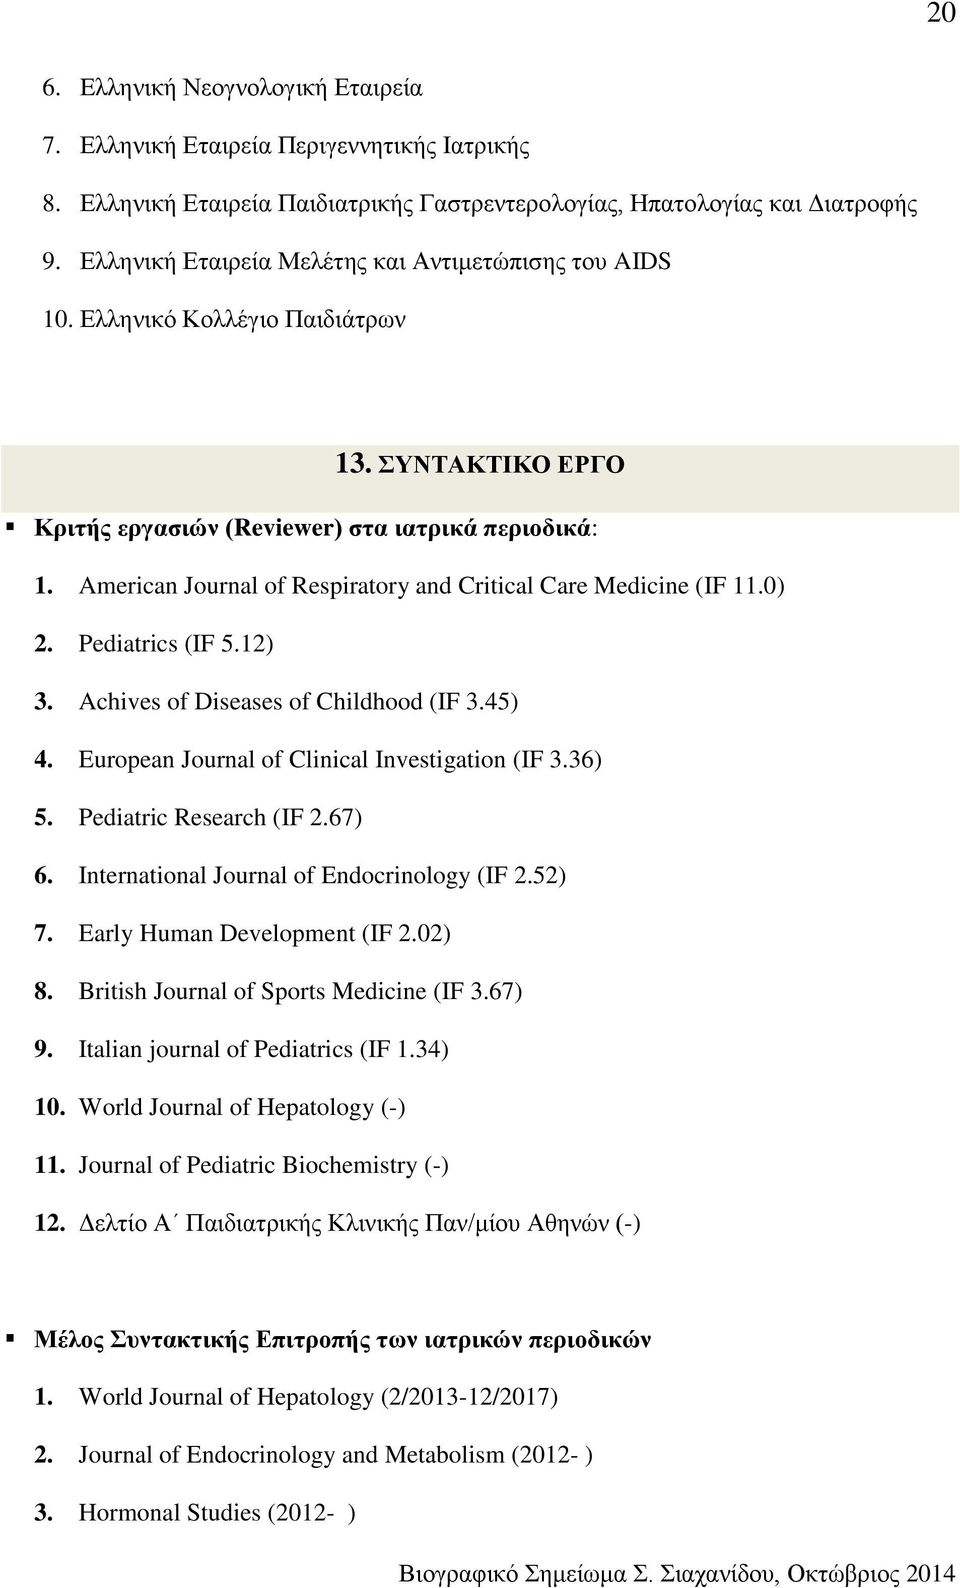 American Journal of Respiratory and Critical Care Medicine (IF 11.0) 2. Pediatrics (IF 5.12) 3. Achives of Diseases of Childhood (IF 3.45) 4. European Journal of Clinical Investigation (IF 3.36) 5.